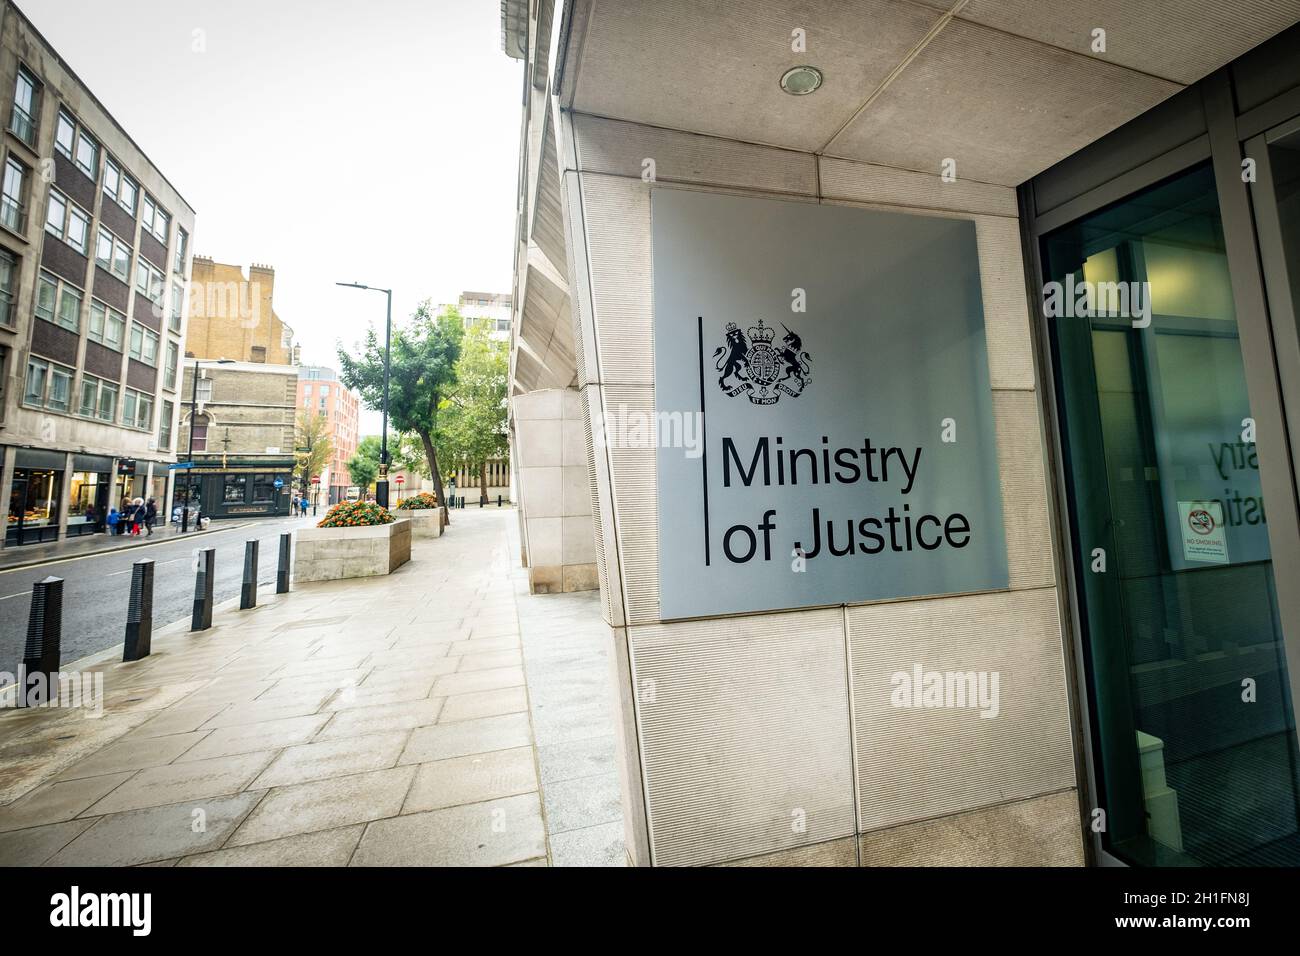 Westminster London- Ministry Of Justice signage. UK government building Stock Photo